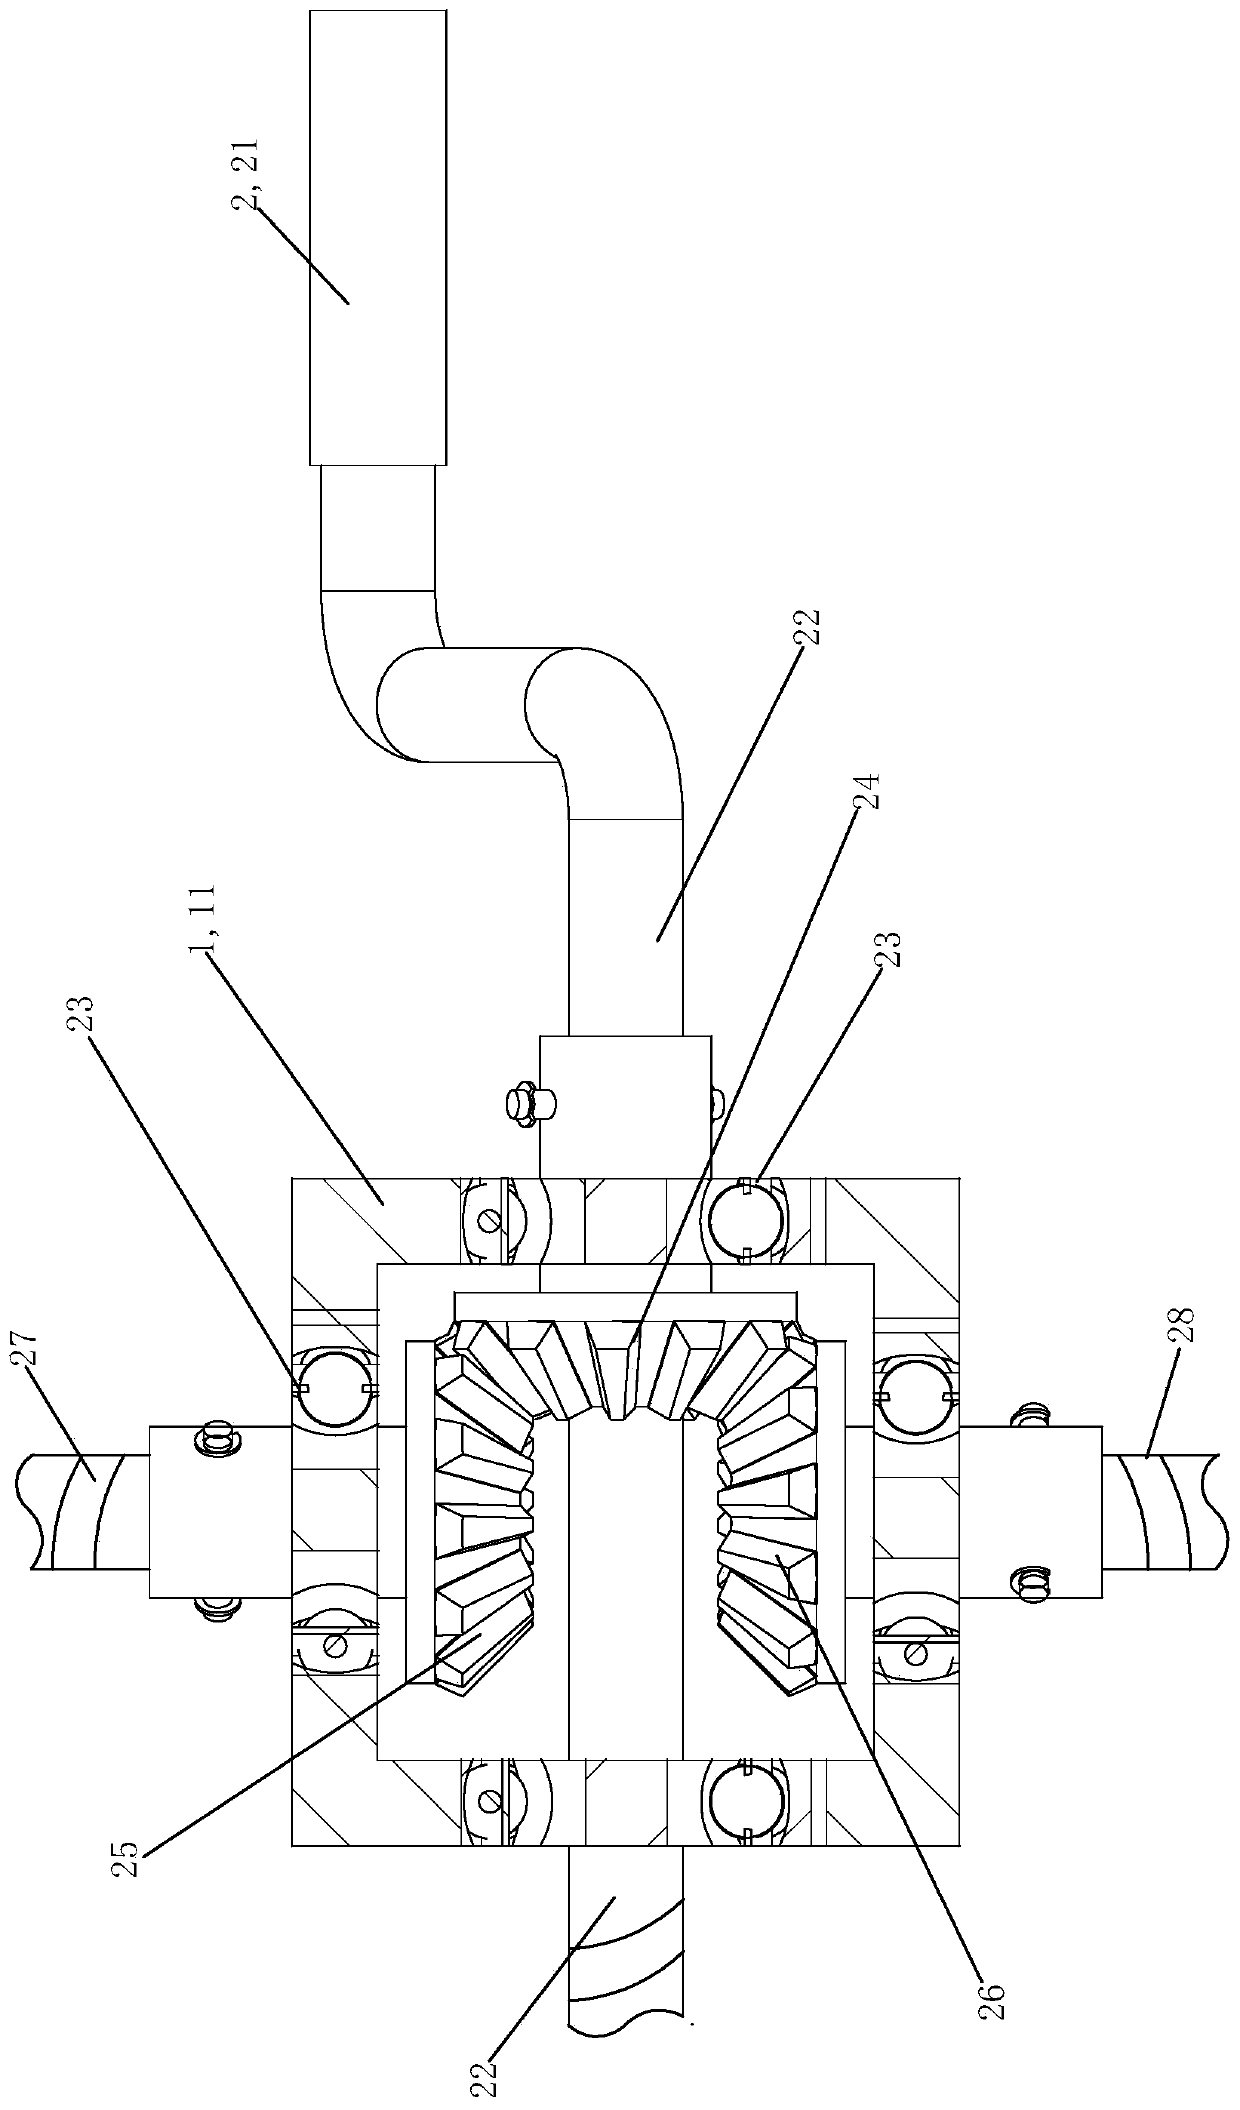 10 kV centrally installed switchgear disconnector energy storage spring dismounting and mounting tool